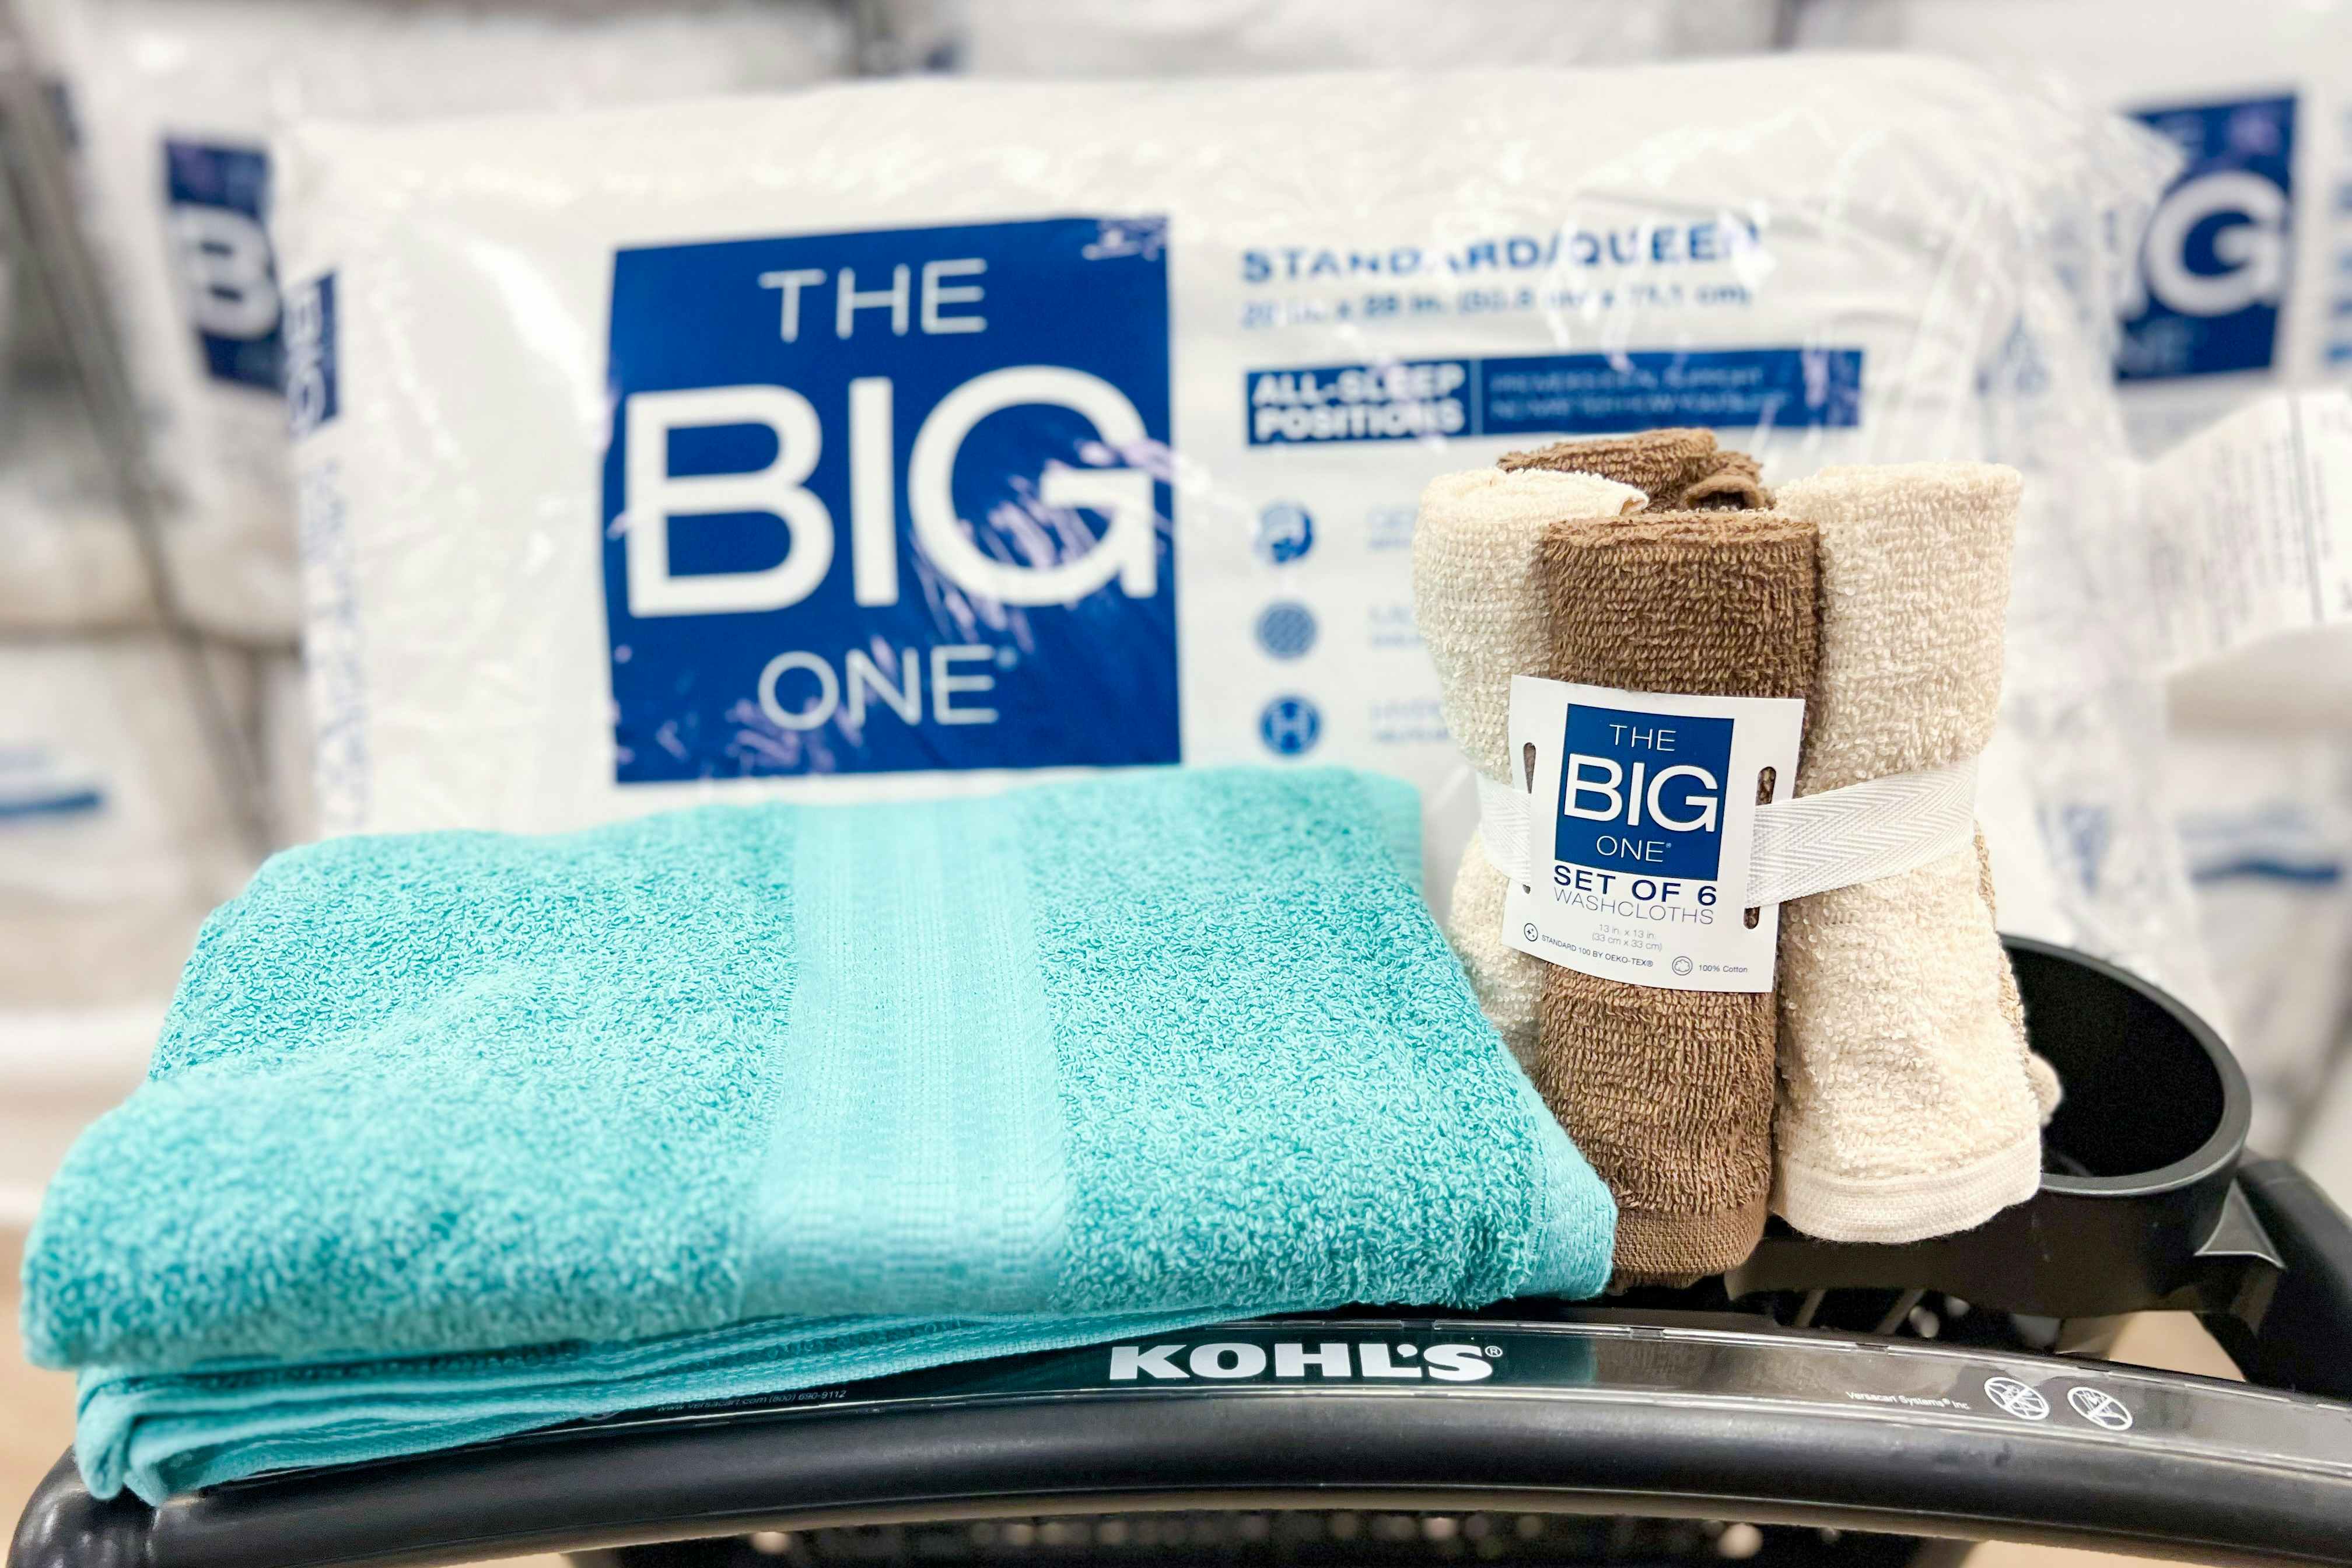 Get The Big One Bath Towels or Pillows for Only $2.54 at Kohl's 